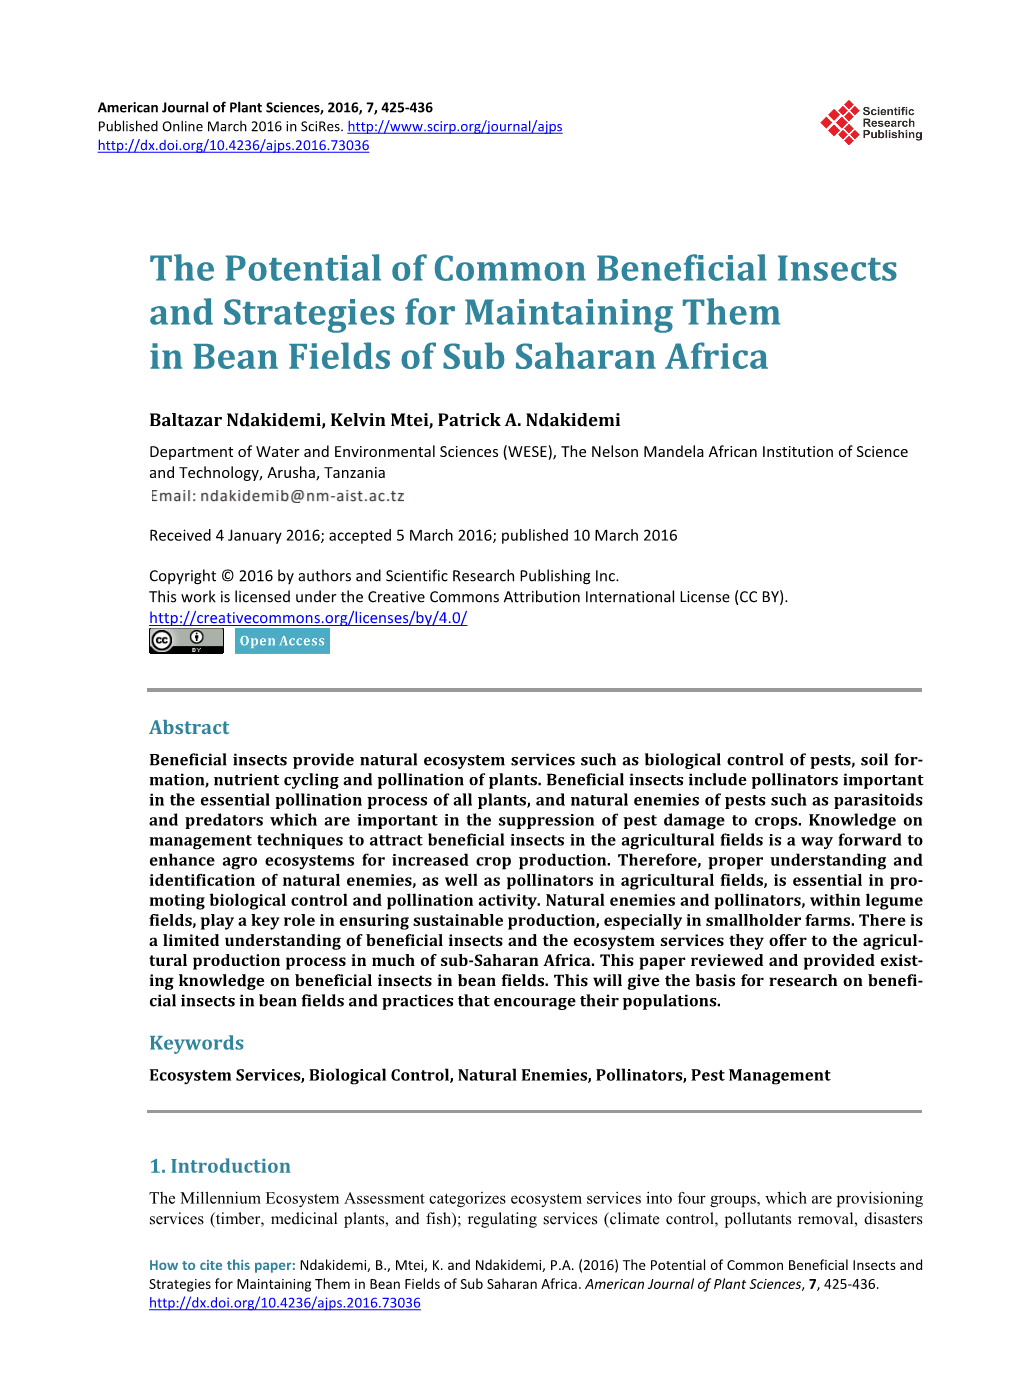 The Potential of Common Beneficial Insects and Strategies for Maintaining Them in Bean Fields of Sub Saharan Africa